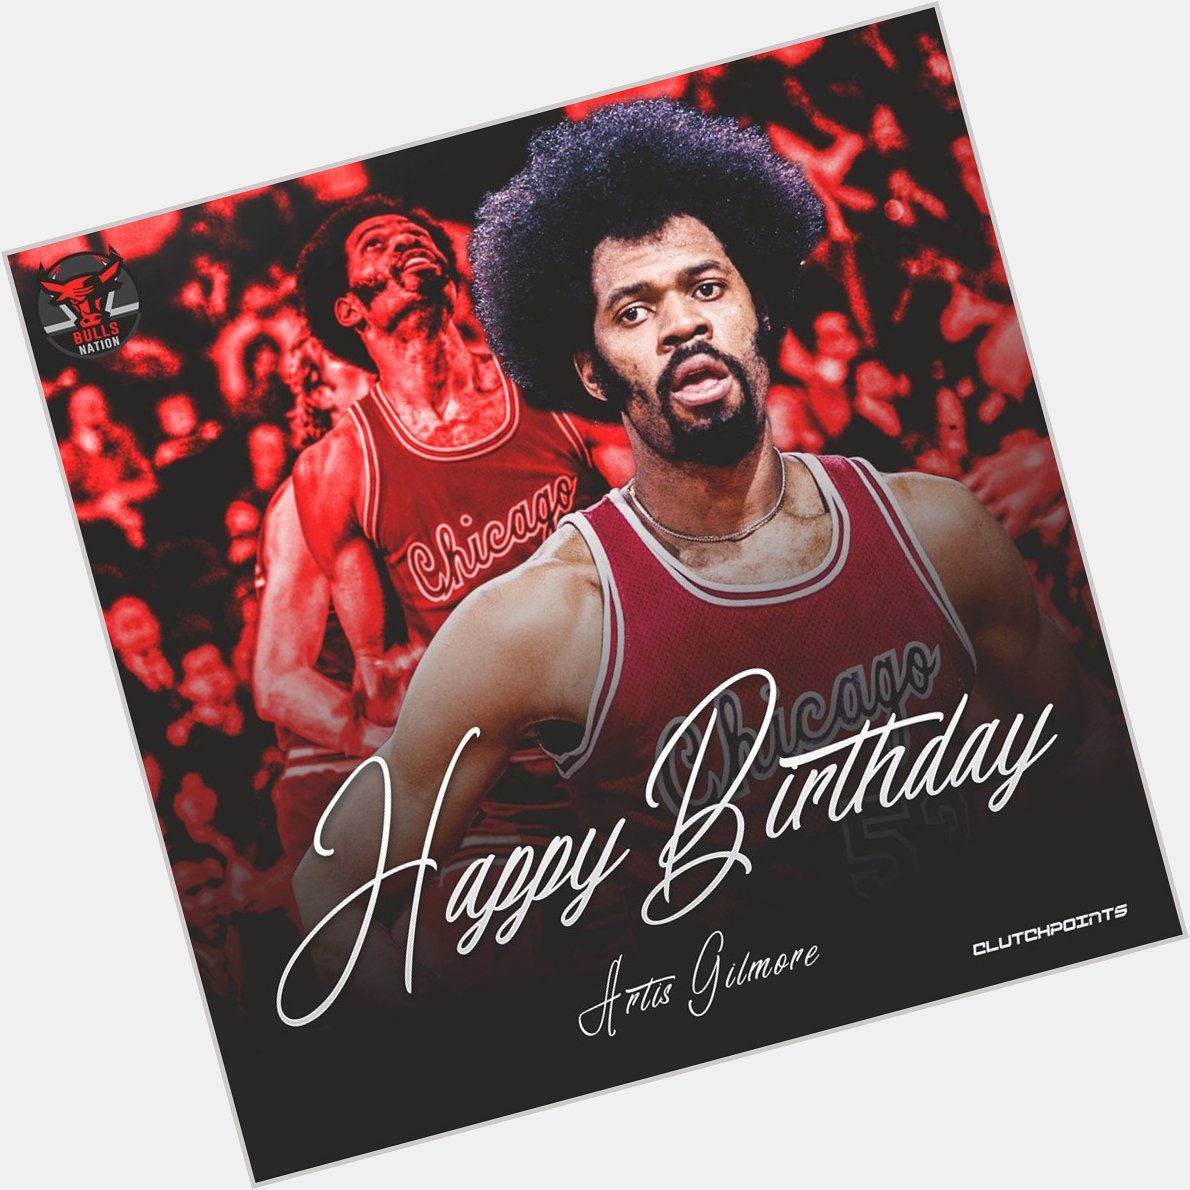 Join Bulls Nation in wishing Artis Gilmore a happy 70th birthday!  